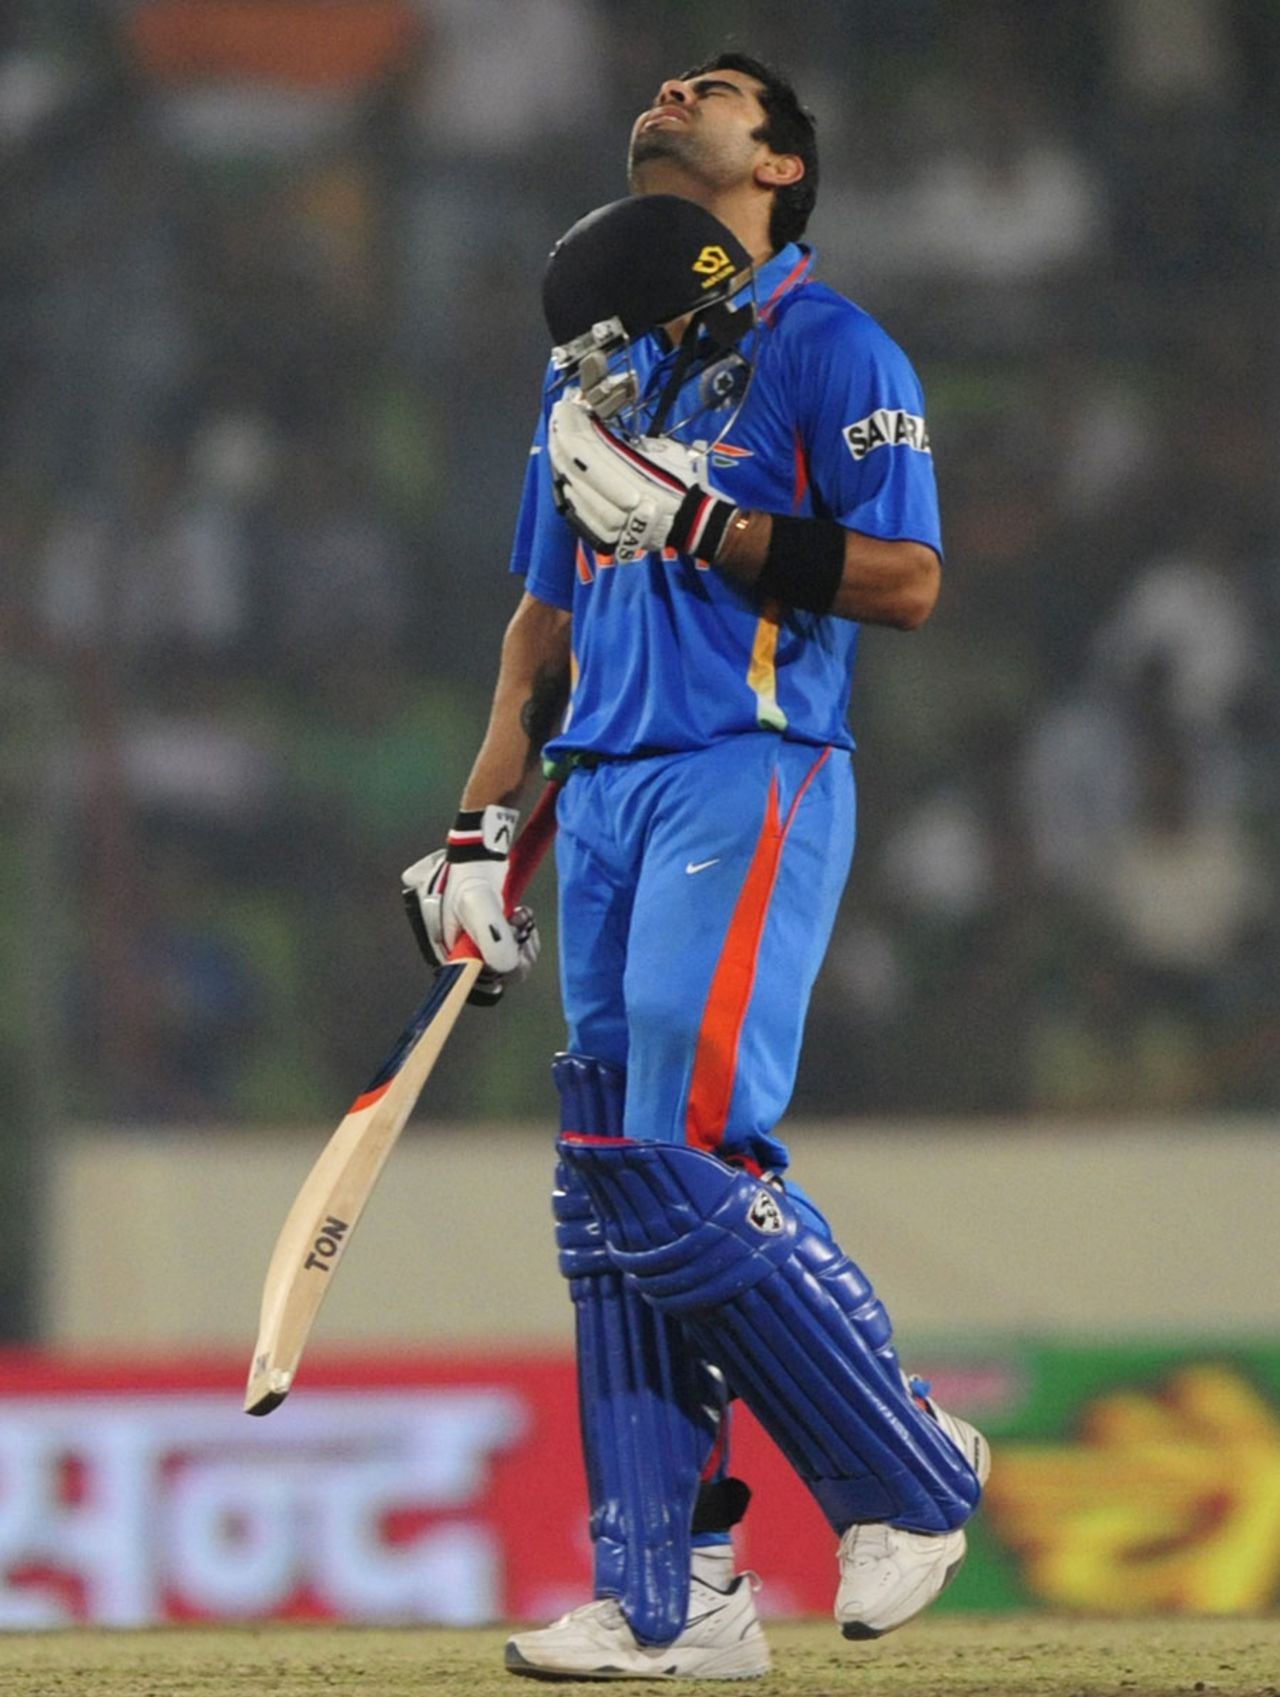 Virat Kohli reacts to reaching 150 for the first time, India v Pakistan, Asia Cup, Mirpur, March 18, 2012